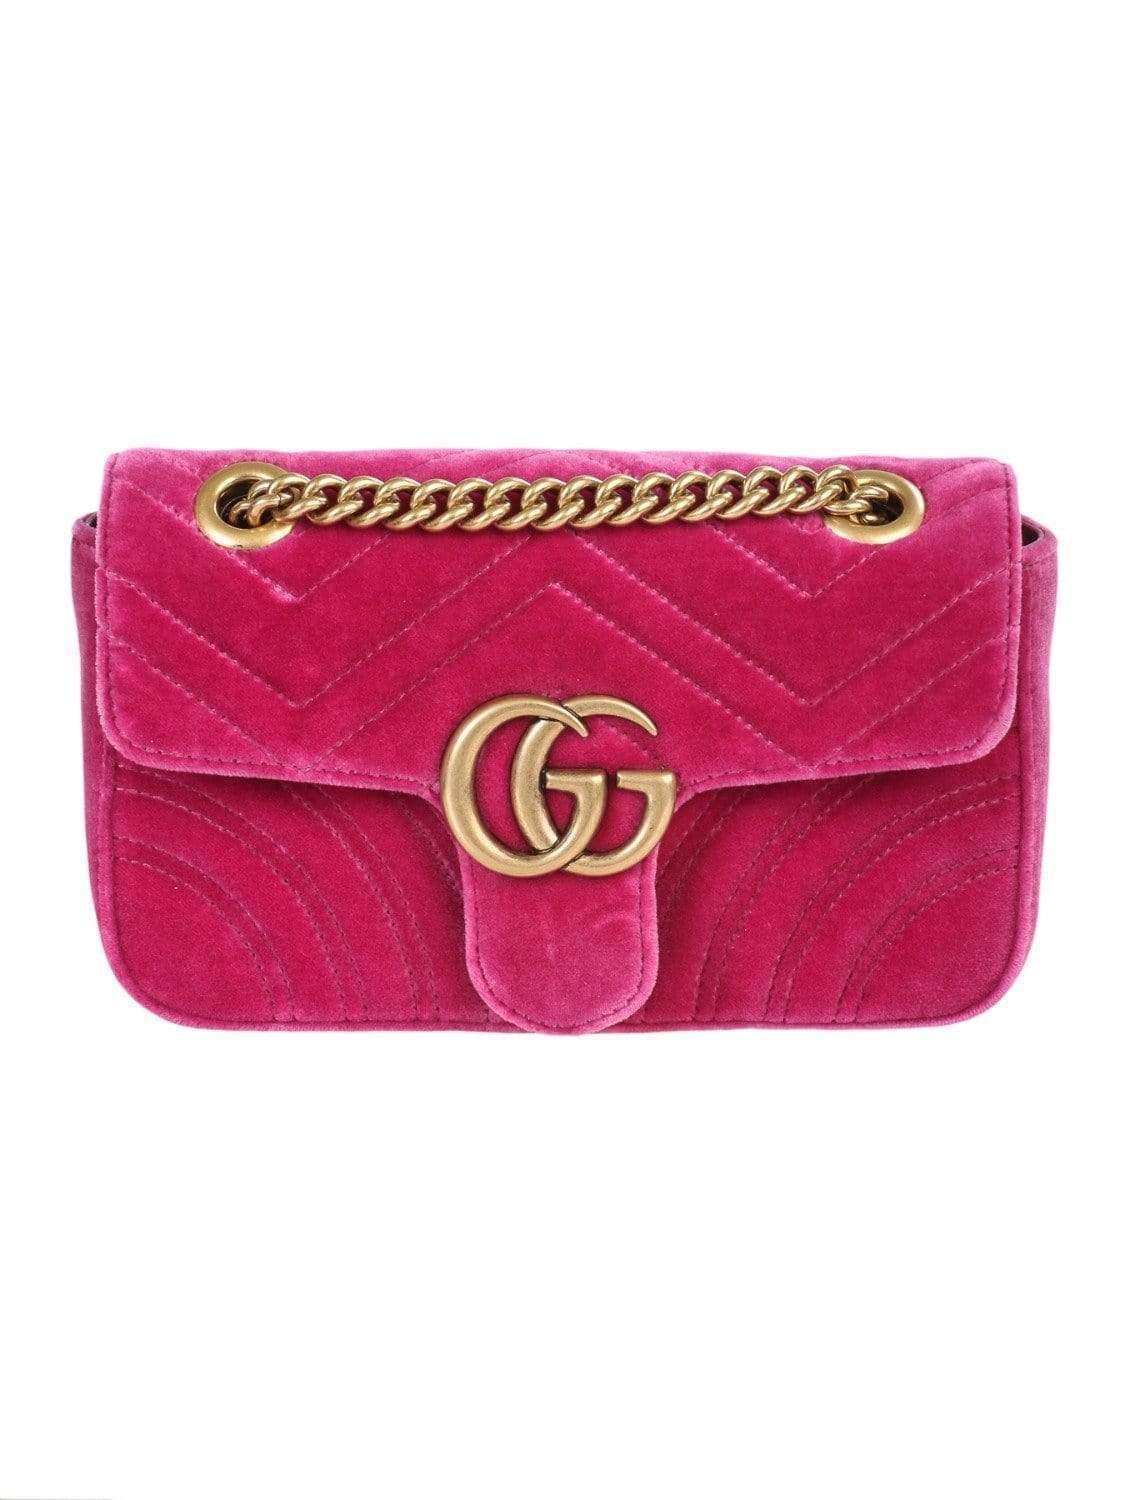 Gucci Marmont Mini Gg Bag In Velvet With Chevron Pattern And Heart On The -